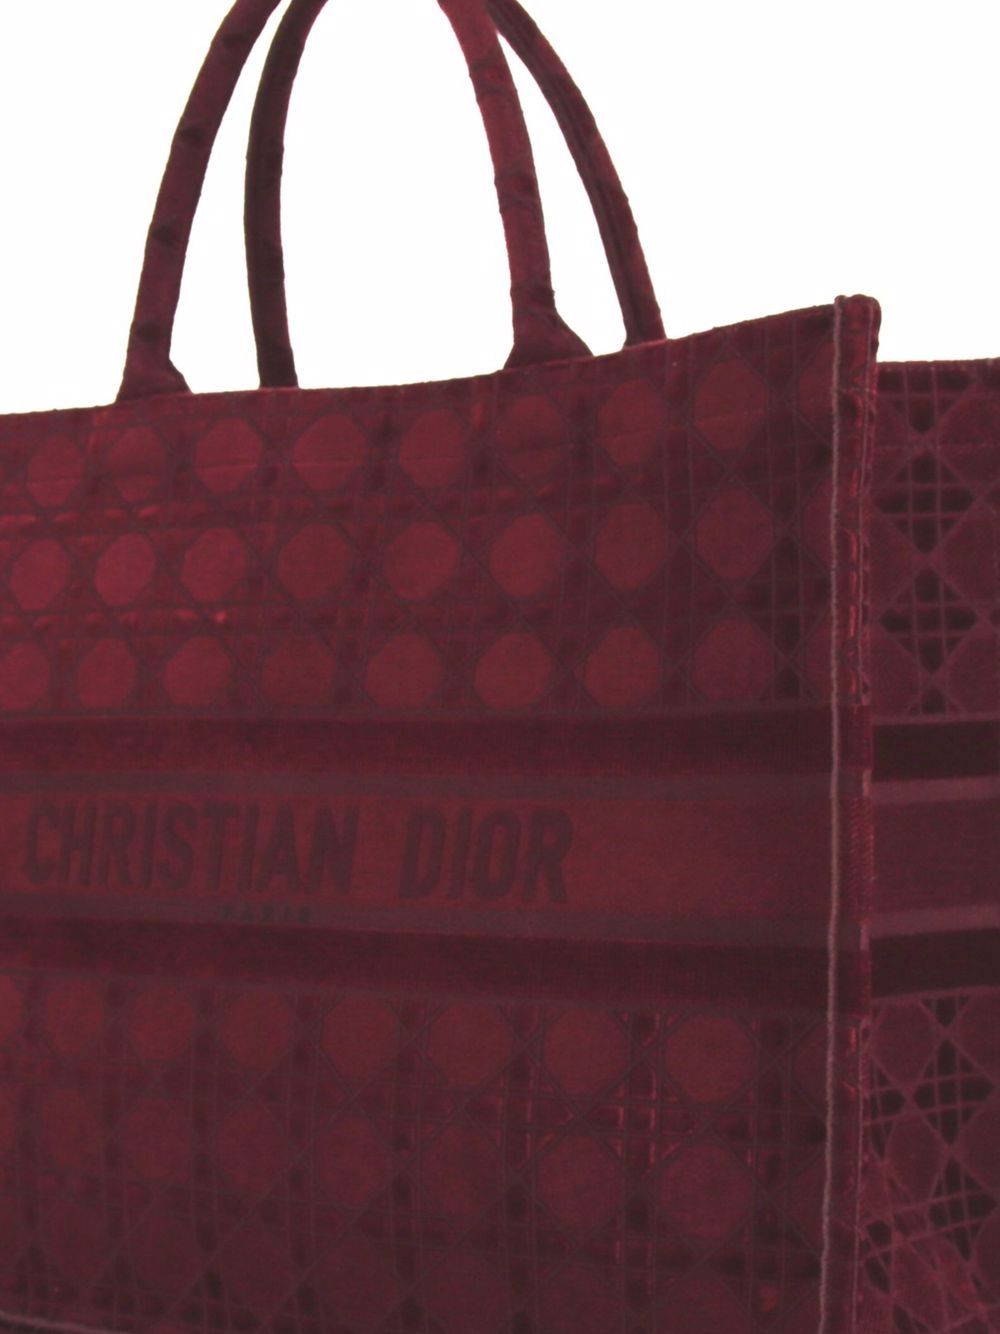 Christian Dior pre-owned Large Book Tote Bag - Farfetch